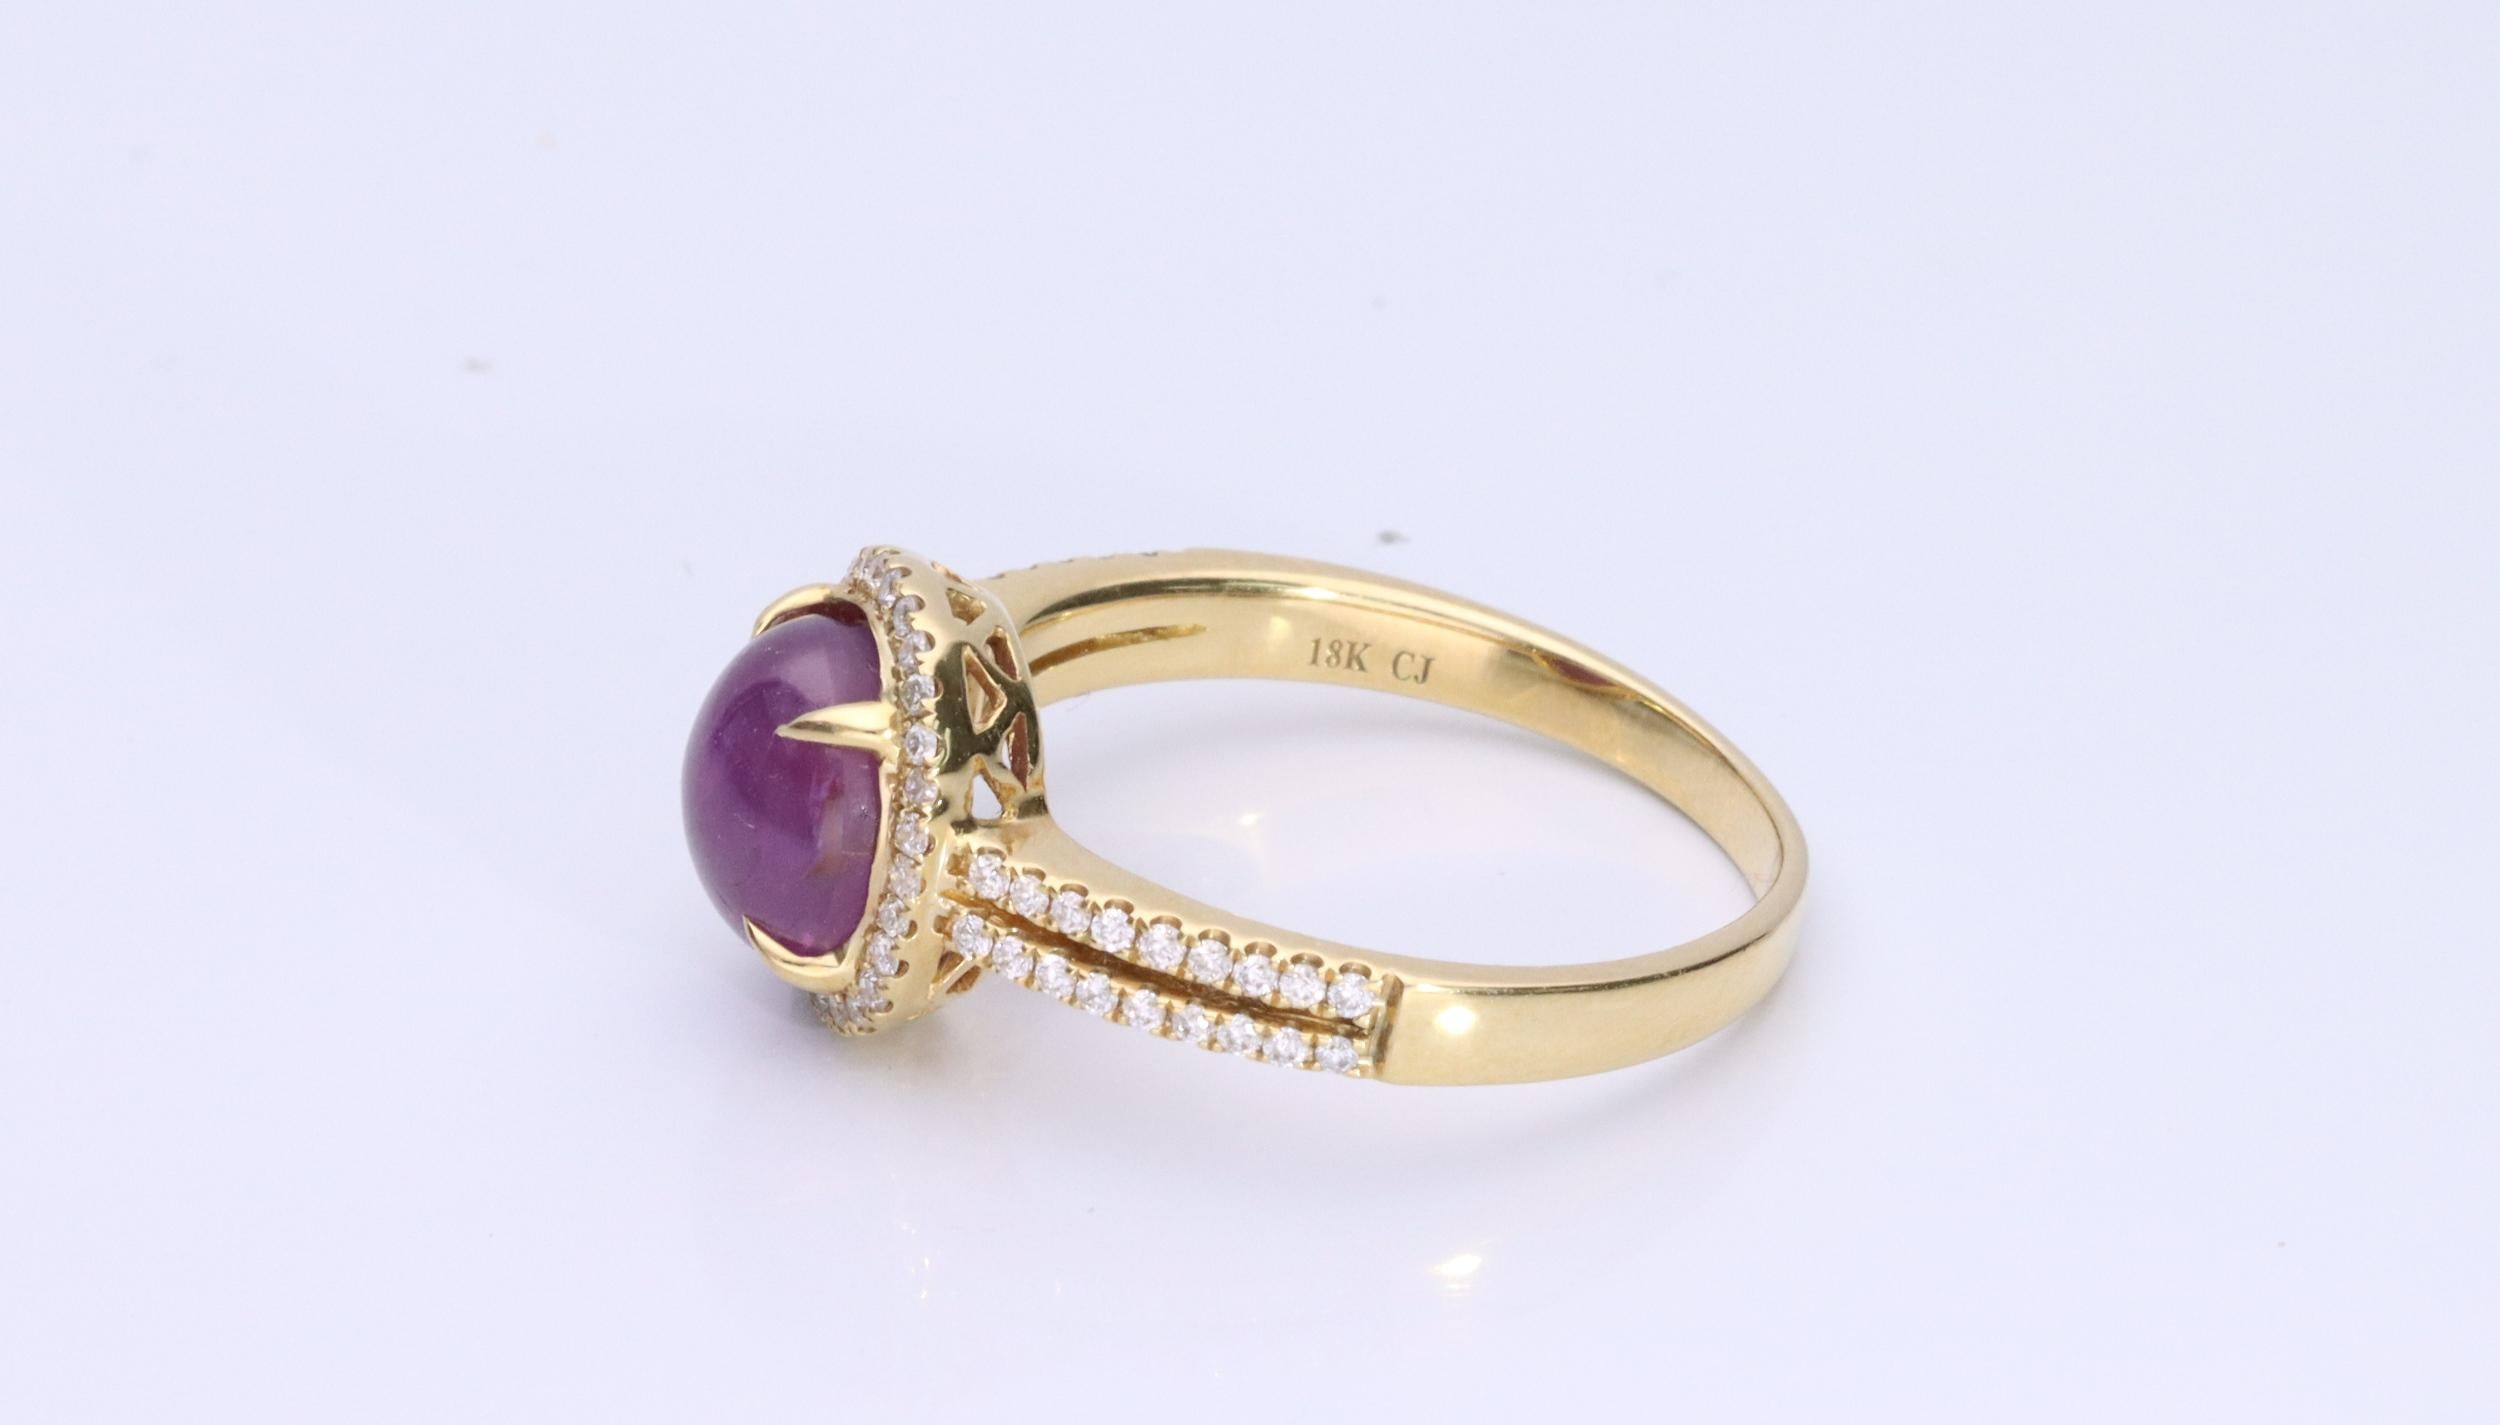 Decorate yourself in elegance with this Ring is crafted from 18-karat Yellow Gold by Gin & Grace. This Ring is made up of Oval-Cab (1 pcs) 3.10 carat Star Ruby and Round-cut White Diamond (64 Pcs) 0.27 carat. This Ring is weight 3.44 grams. This